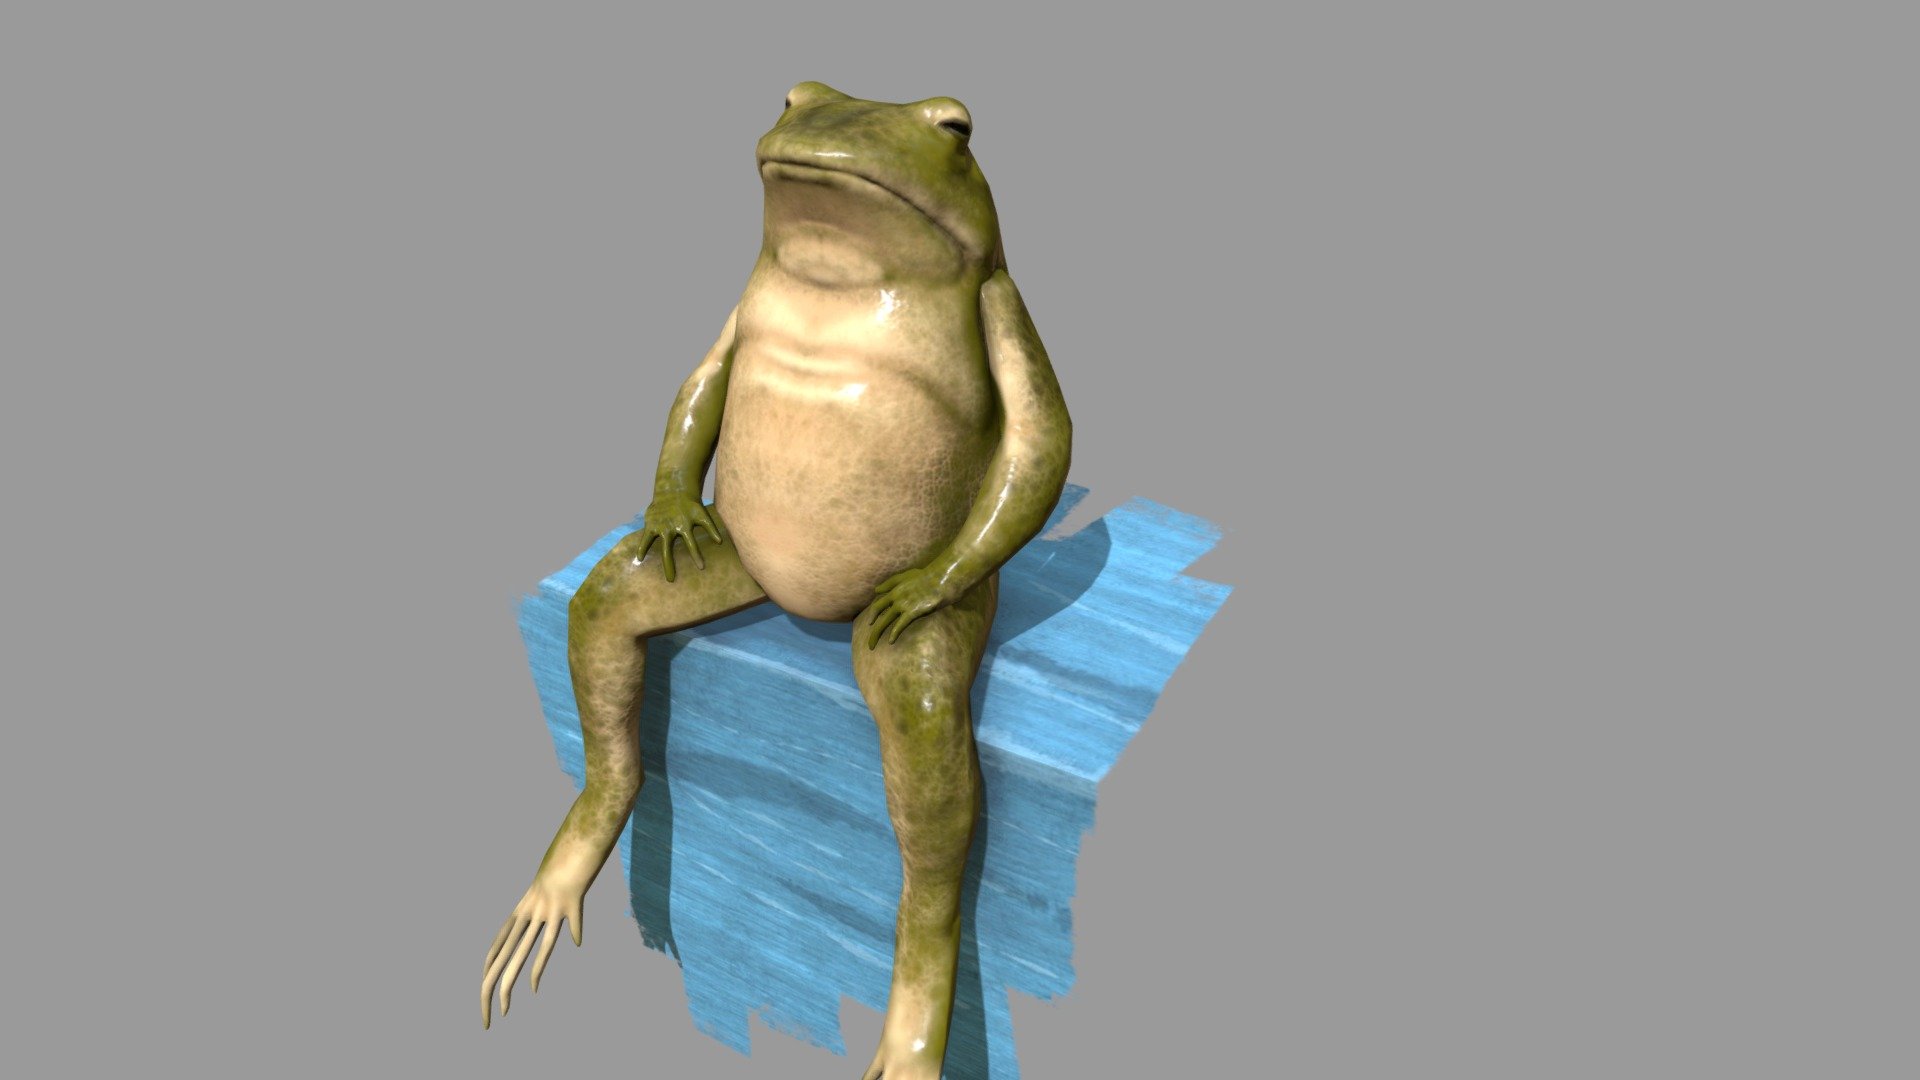 I made this frog for use within a snapchat AR filter.
Filter here: https://www.snapchat.com/unlock/?type=SNAPCODE&amp;uuid=7a53594b954b4b92827c949f4856bad0&amp;metadata=01
The frog is intentionally very low-poly in order to be used seamlessly within AR 3d model